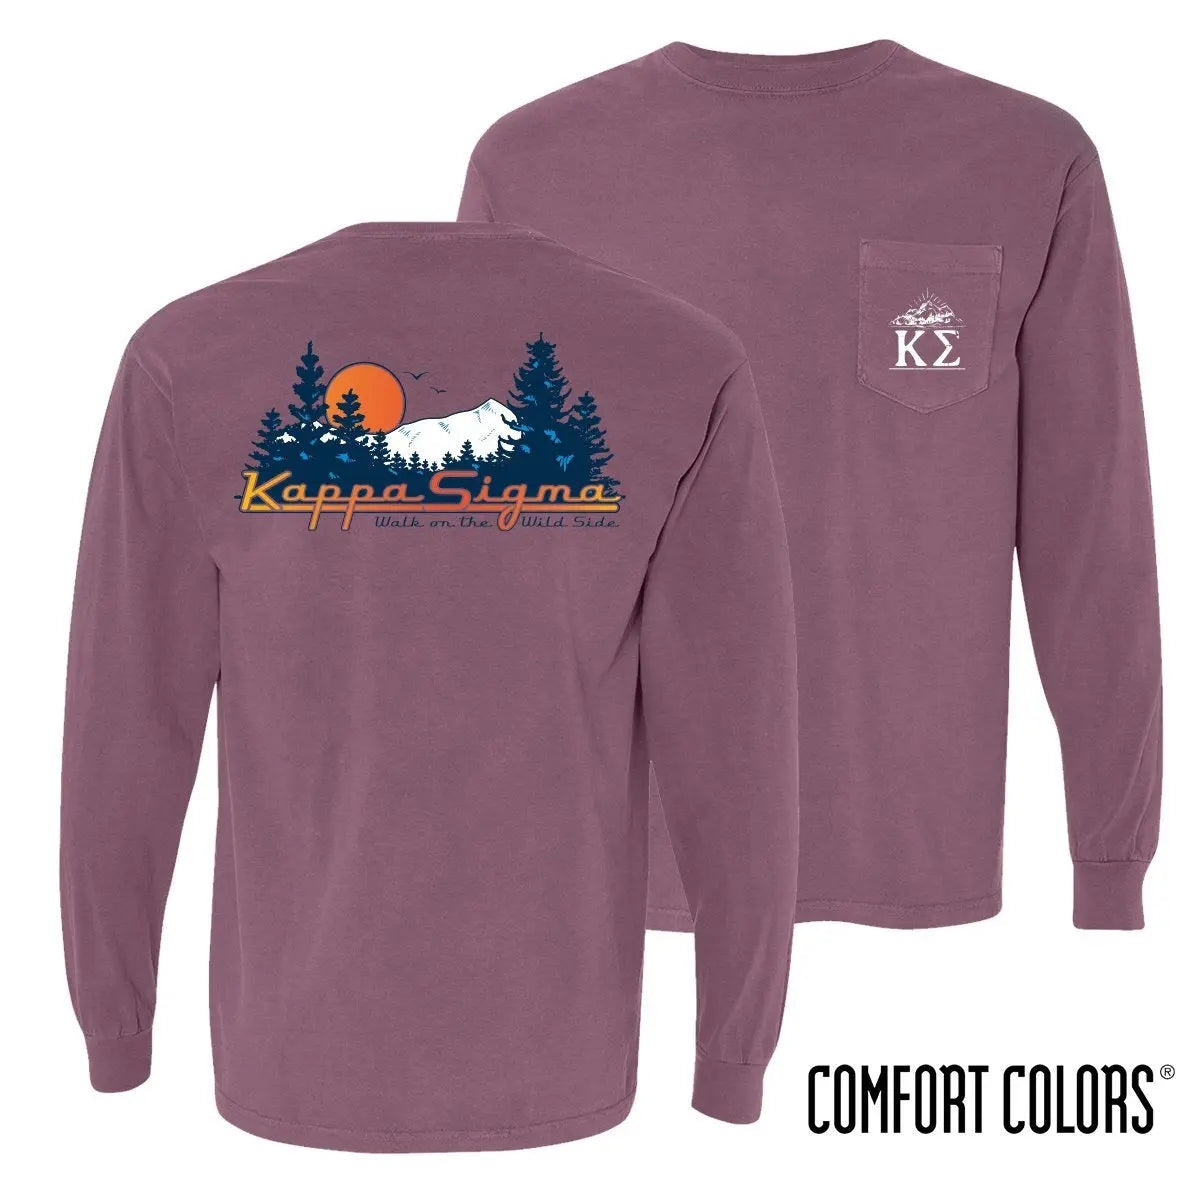 Kappa Sig Comfort Colors Berry Retro Wilderness Long Sleeve Pocket Tee - Kappa Sigma Official Store